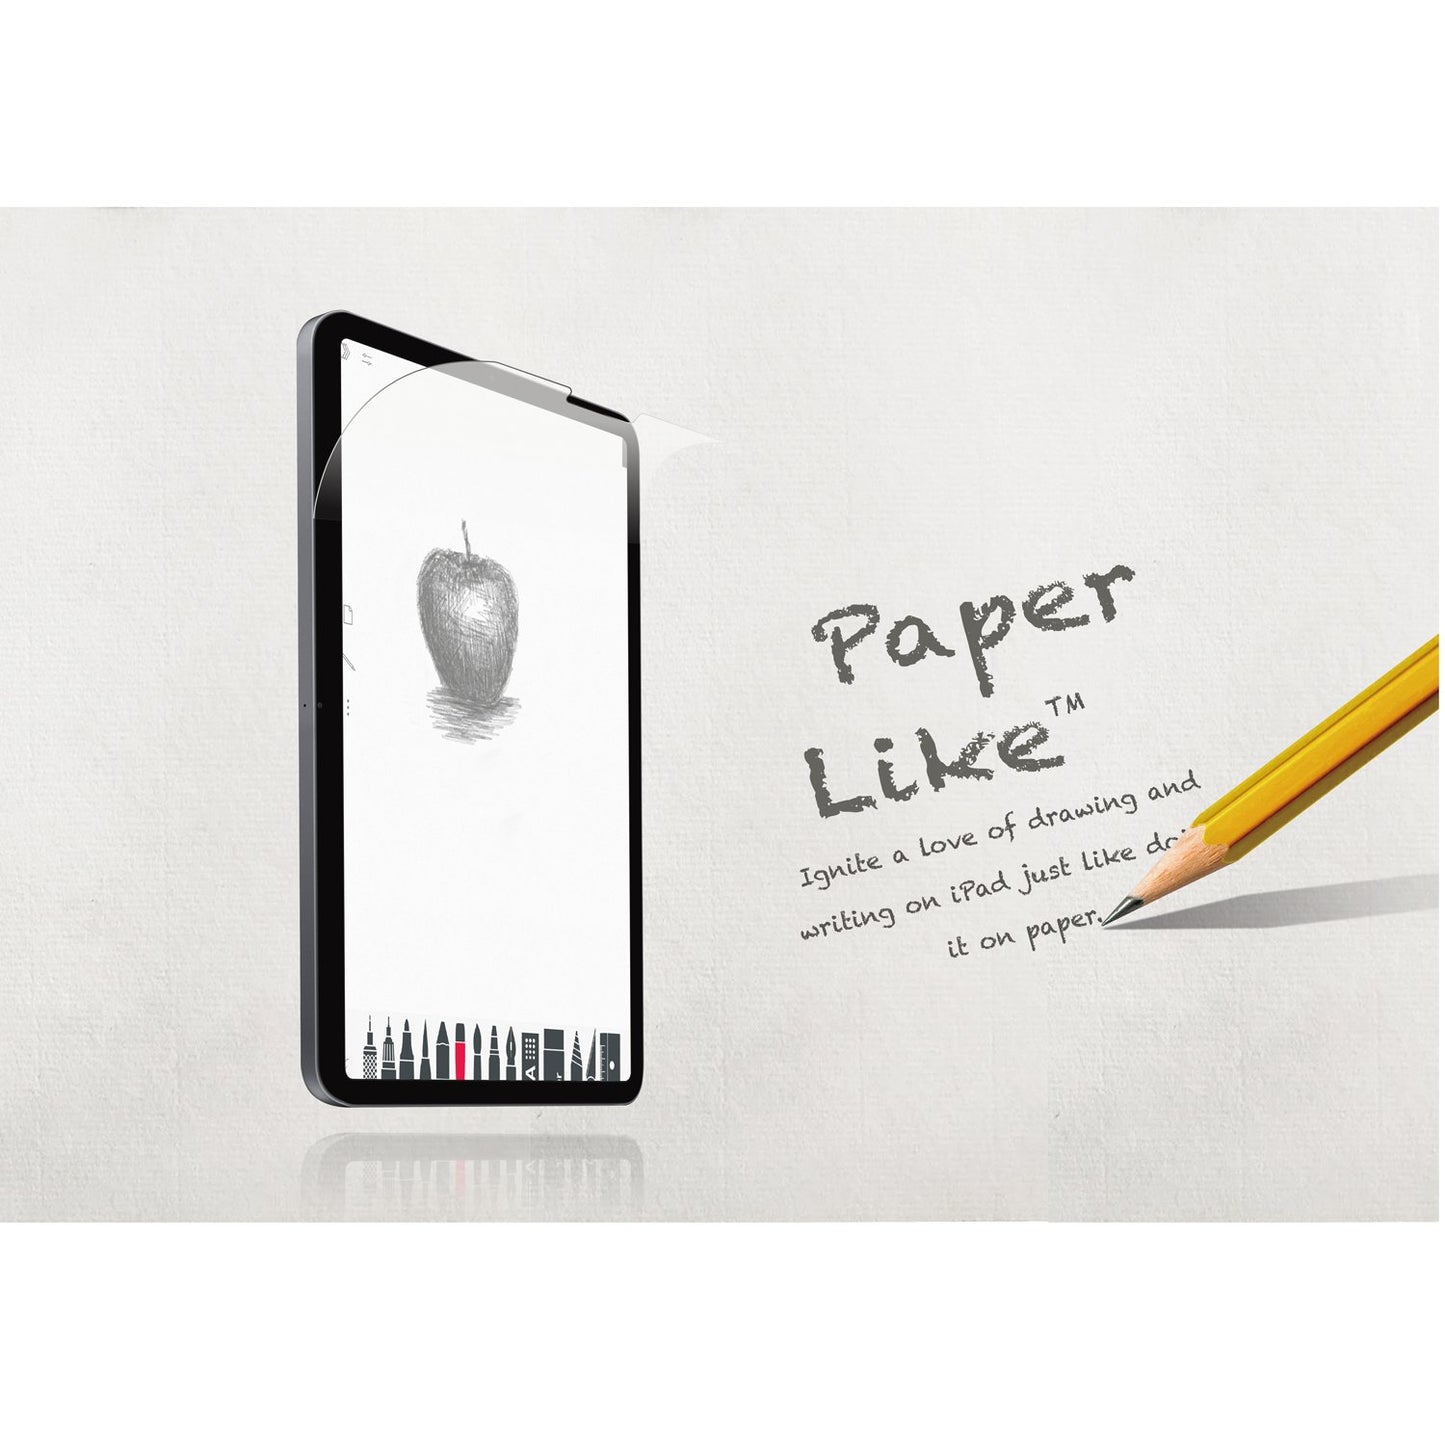 Shop and buy Zeelot Paperlike Film Screen Protector for iPad Mini 5/4 7.9" (2019/2015) Anti-Glare Matte| Casefactorie® online with great deals and sales prices with fast and safe shipping. Casefactorie is the largest Singapore official authorised retailer for the largest collection of mobile premium accessories.